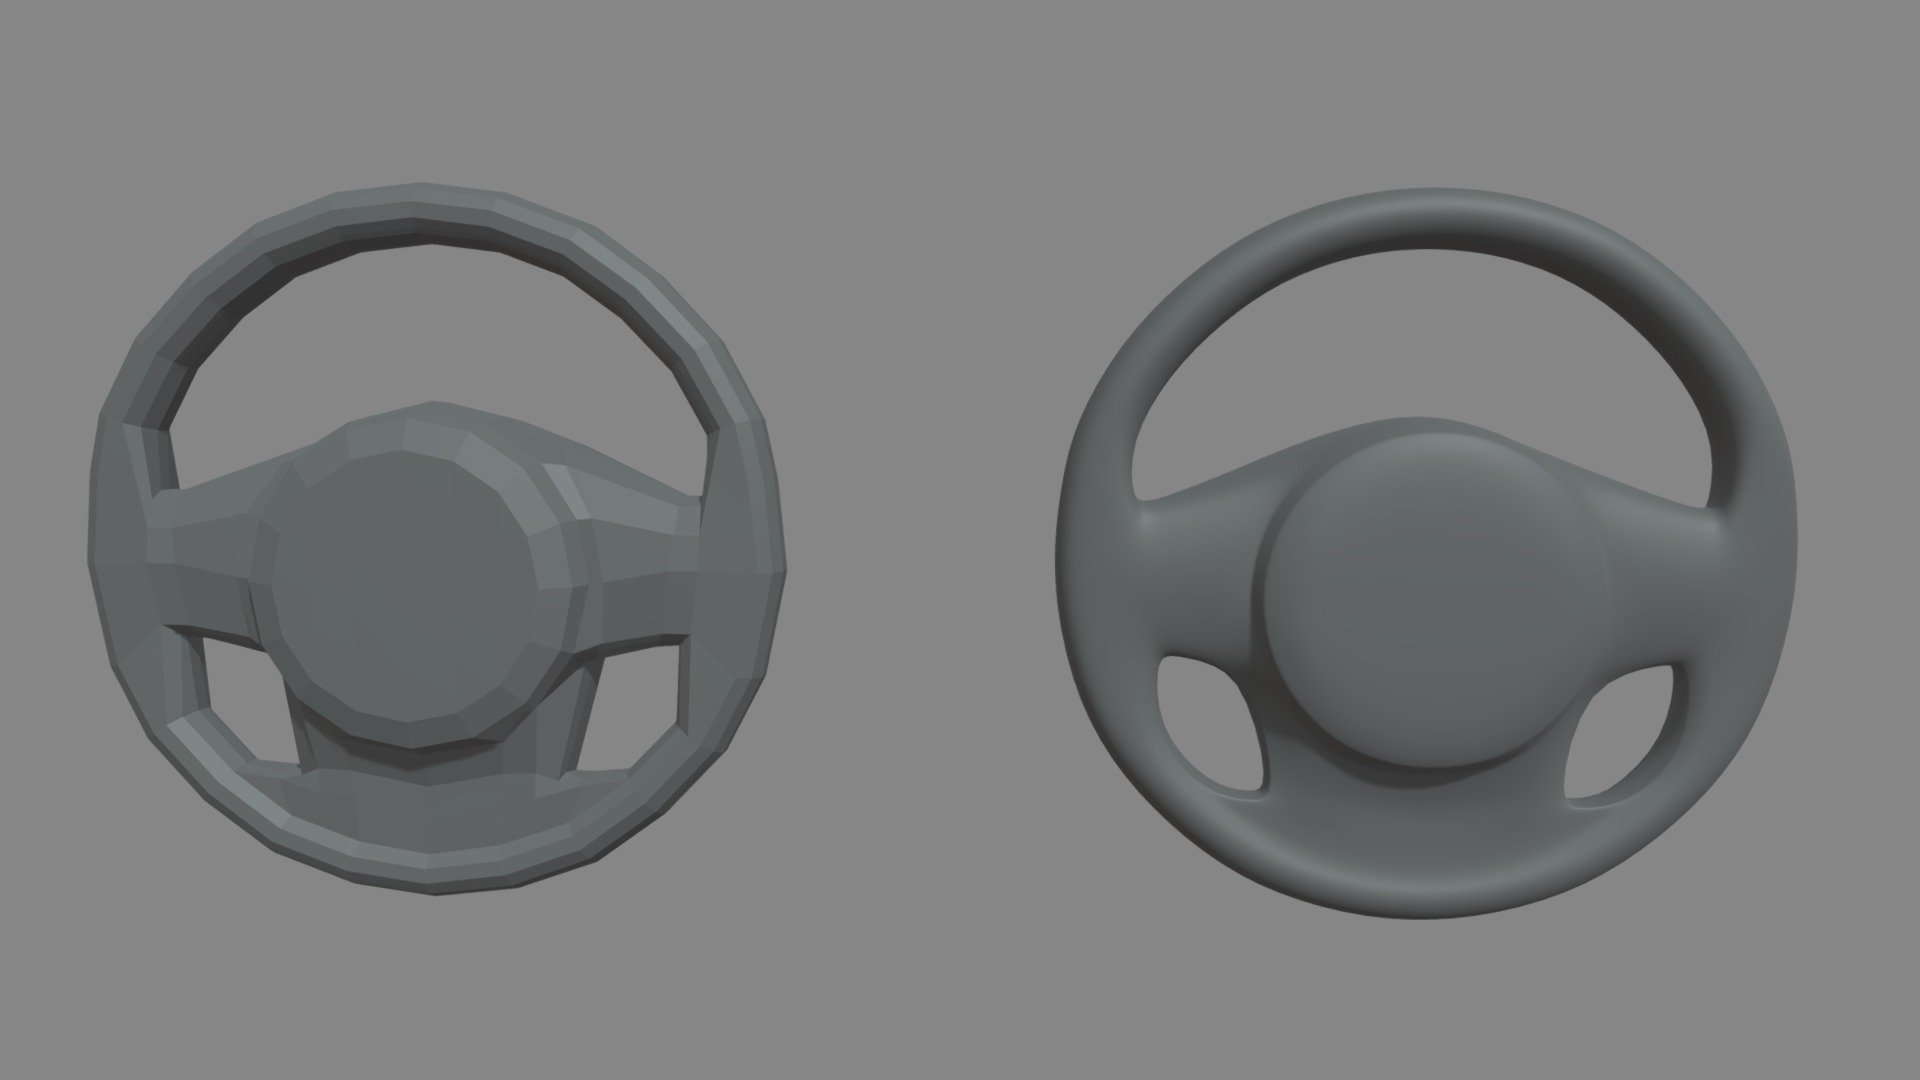 This model contains an Steering Wheel Car Custom based on a real stylized steering wheel from a real car which i modeled in Maya 2018.This model is perfect to create a new great scene with different car pieces or part of a car model.

This model could be available for the 3D printing, the STL is added and work correctly in Ultimaker Cura. If you have any problem contact me.

The model is ready as one unique part and ready for being a great CGI model and also a 3D printable model. The model is ready in low poly and high poly.

If you need any kind of help contact me, i will help you with everything i can. If you like the model please give me some feedback, I would appreciate it.

Don’t doubt on contacting me, i would be very happy to help. If you experience any kind of difficulties, be sure to contact me and i will help you. Sincerely Yours, ViperJr3D - Steering Wheel Car Custom - Buy Royalty Free 3D model by ViperJr3D 3d model